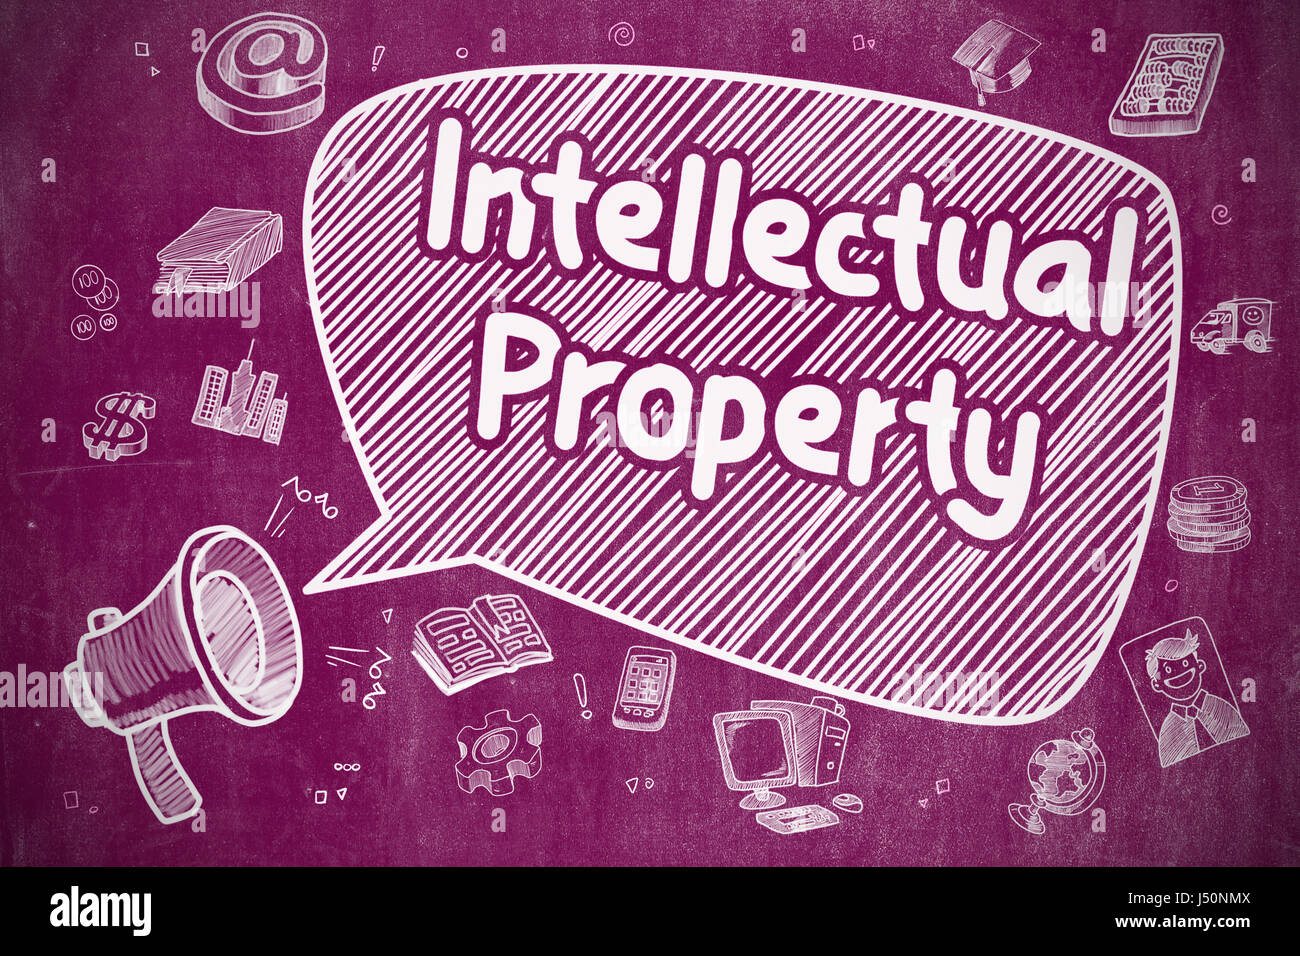 Intellectual Property - Business Concept. Stock Photo